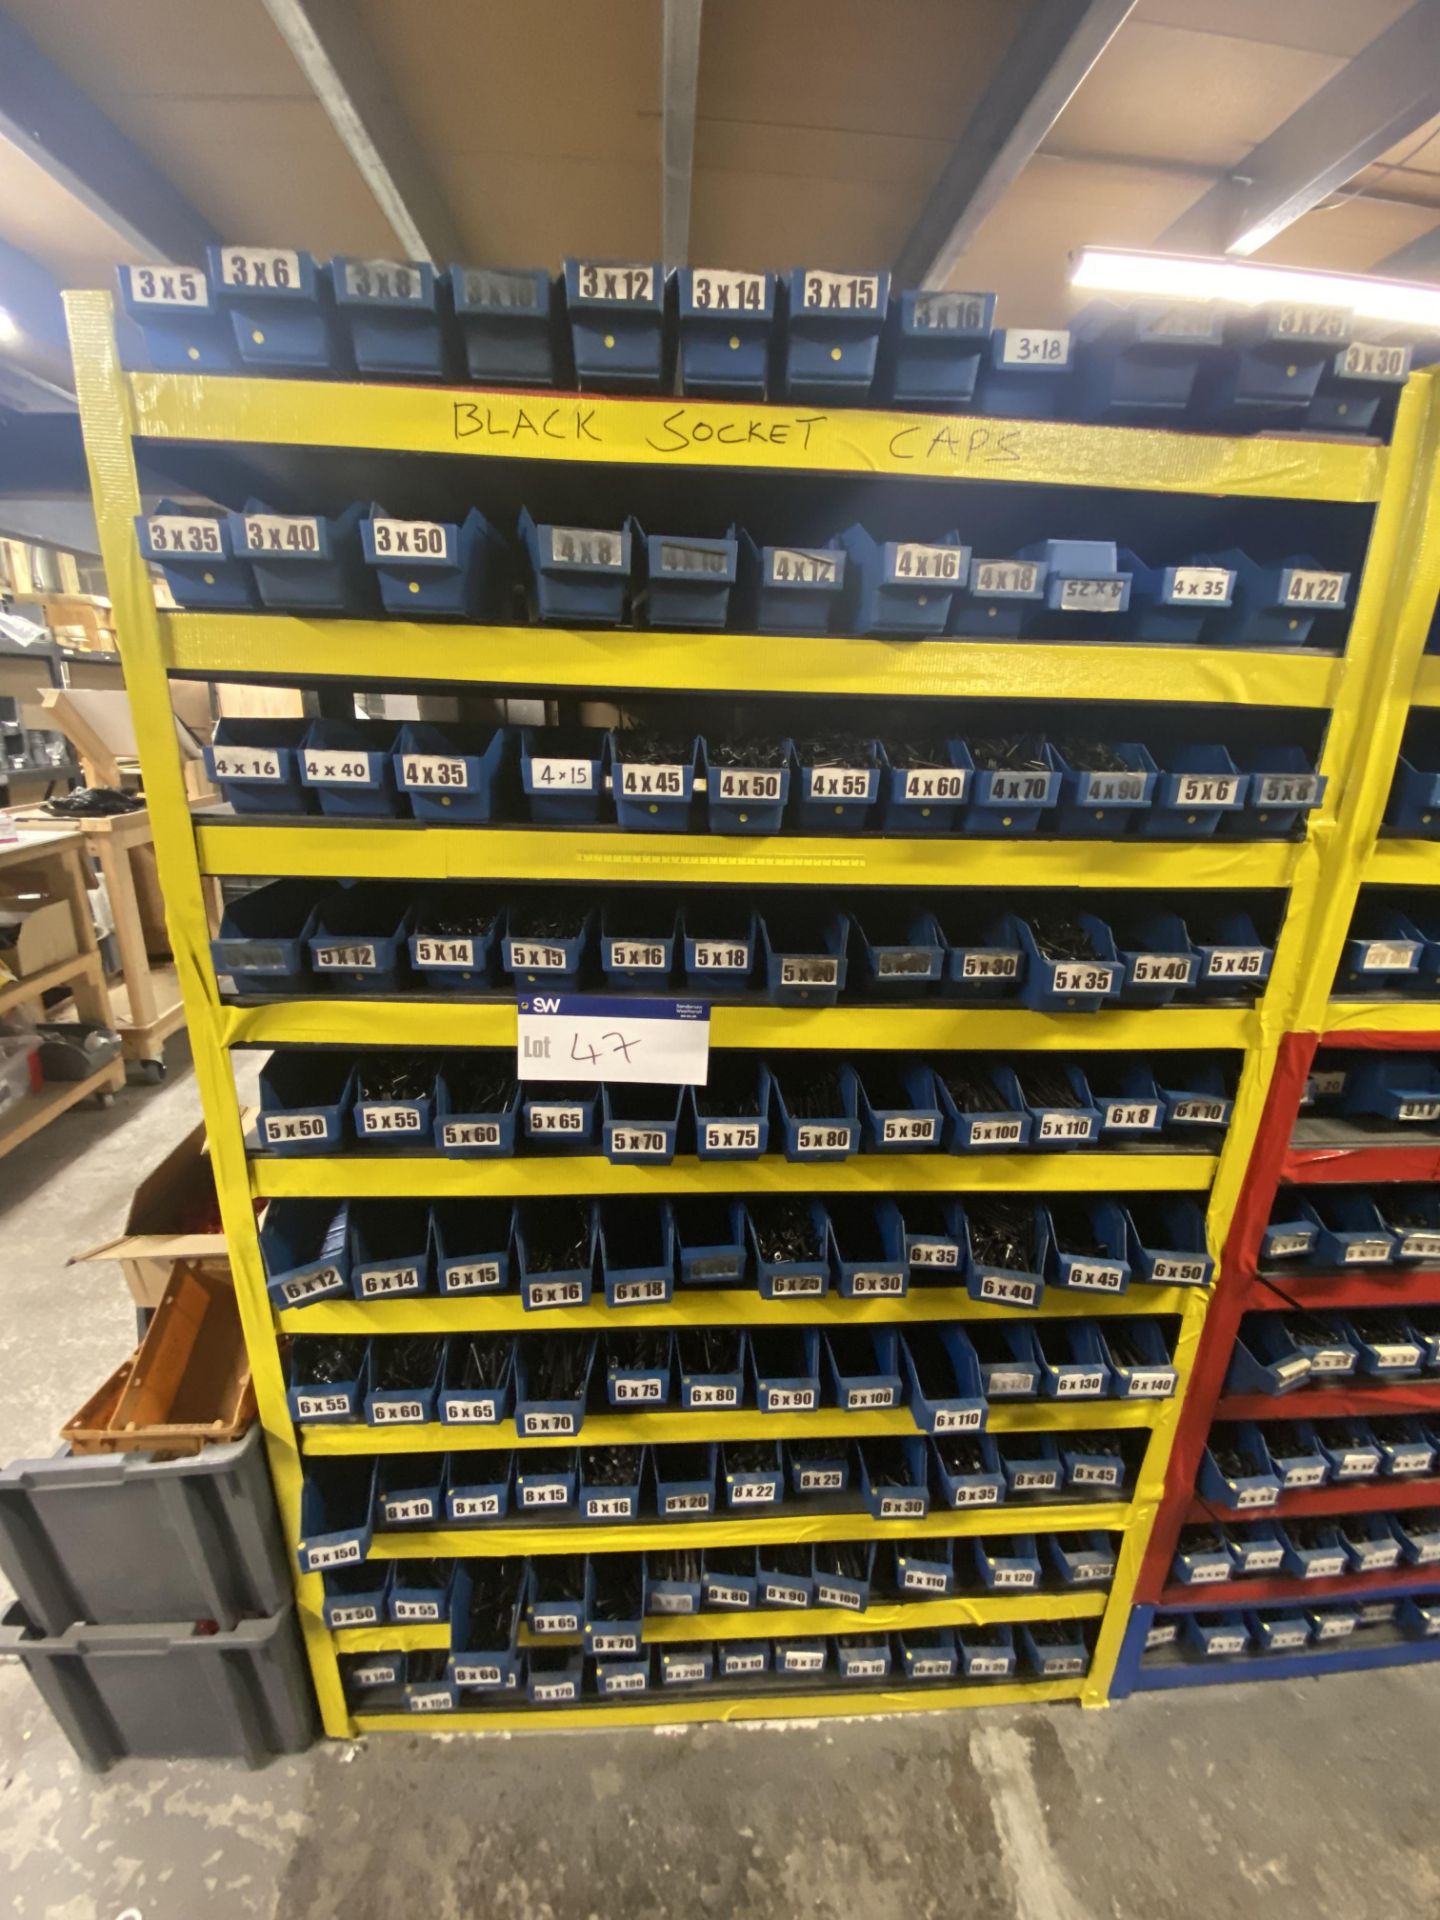 Quantity of Self Colour All Black Socket Caps, with plastic stacking bins, as set out on one bay